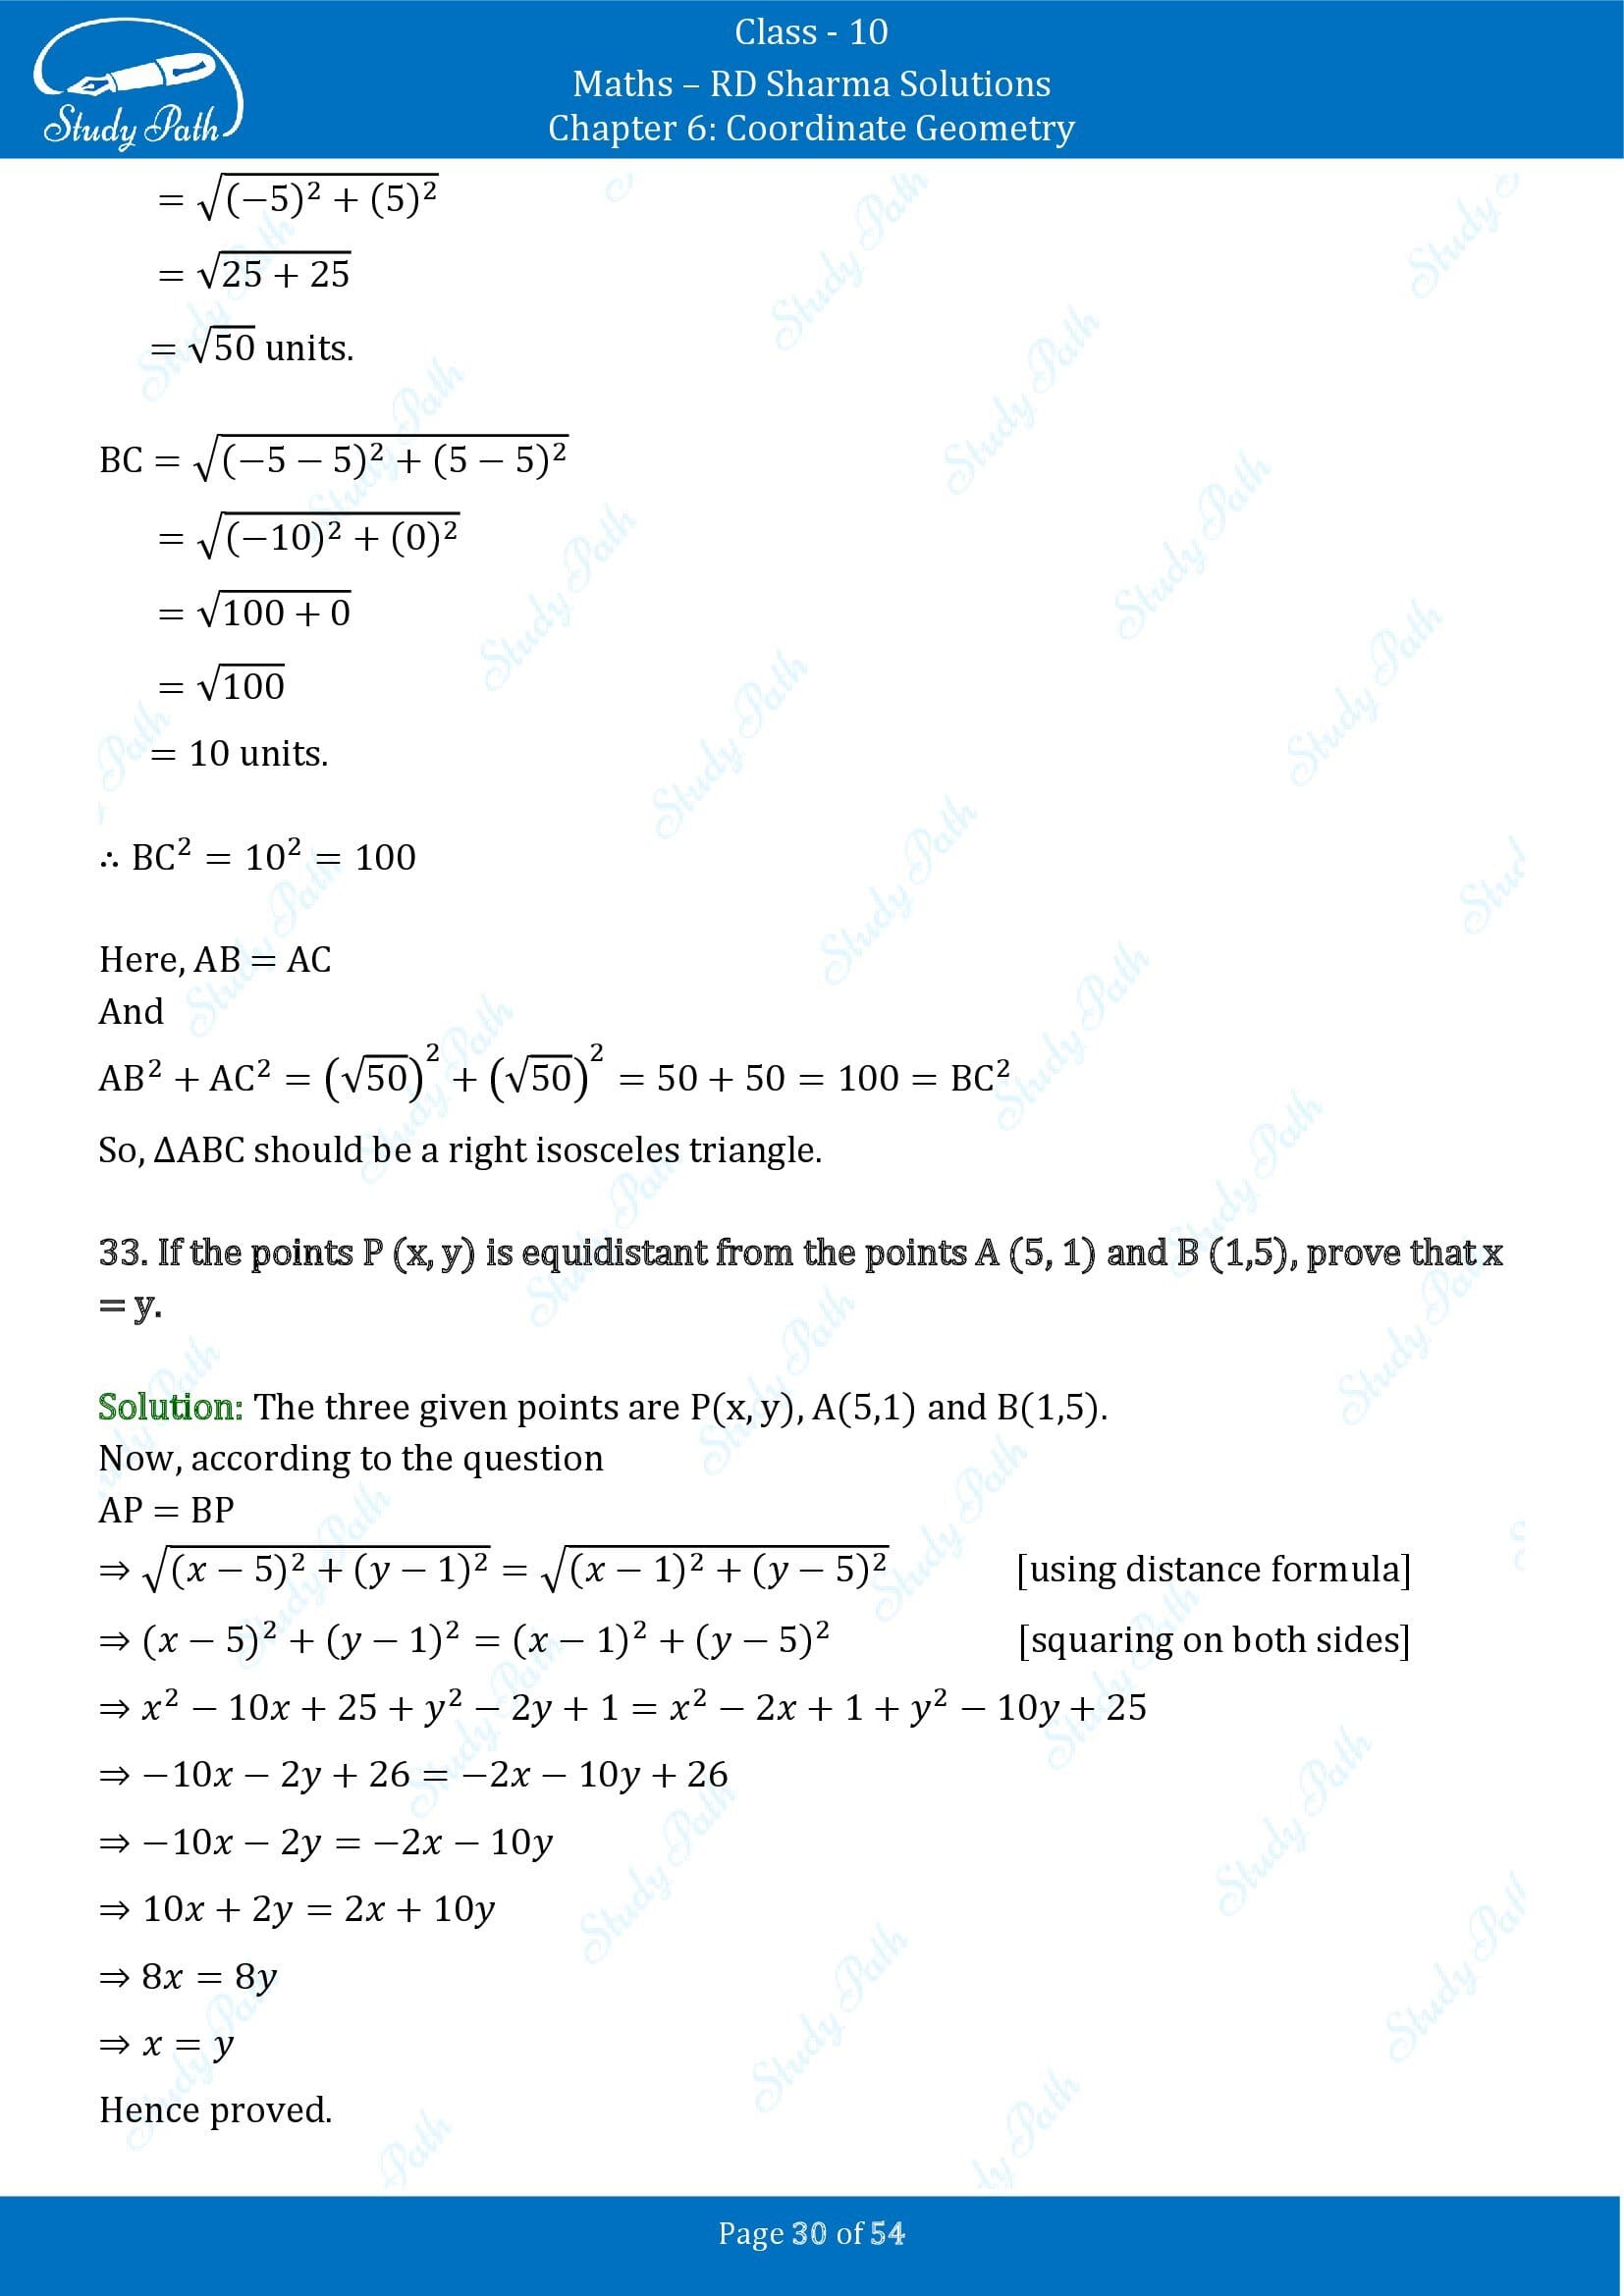 RD Sharma Solutions Class 10 Chapter 6 Coordinate Geometry Exercise 6.2 0030